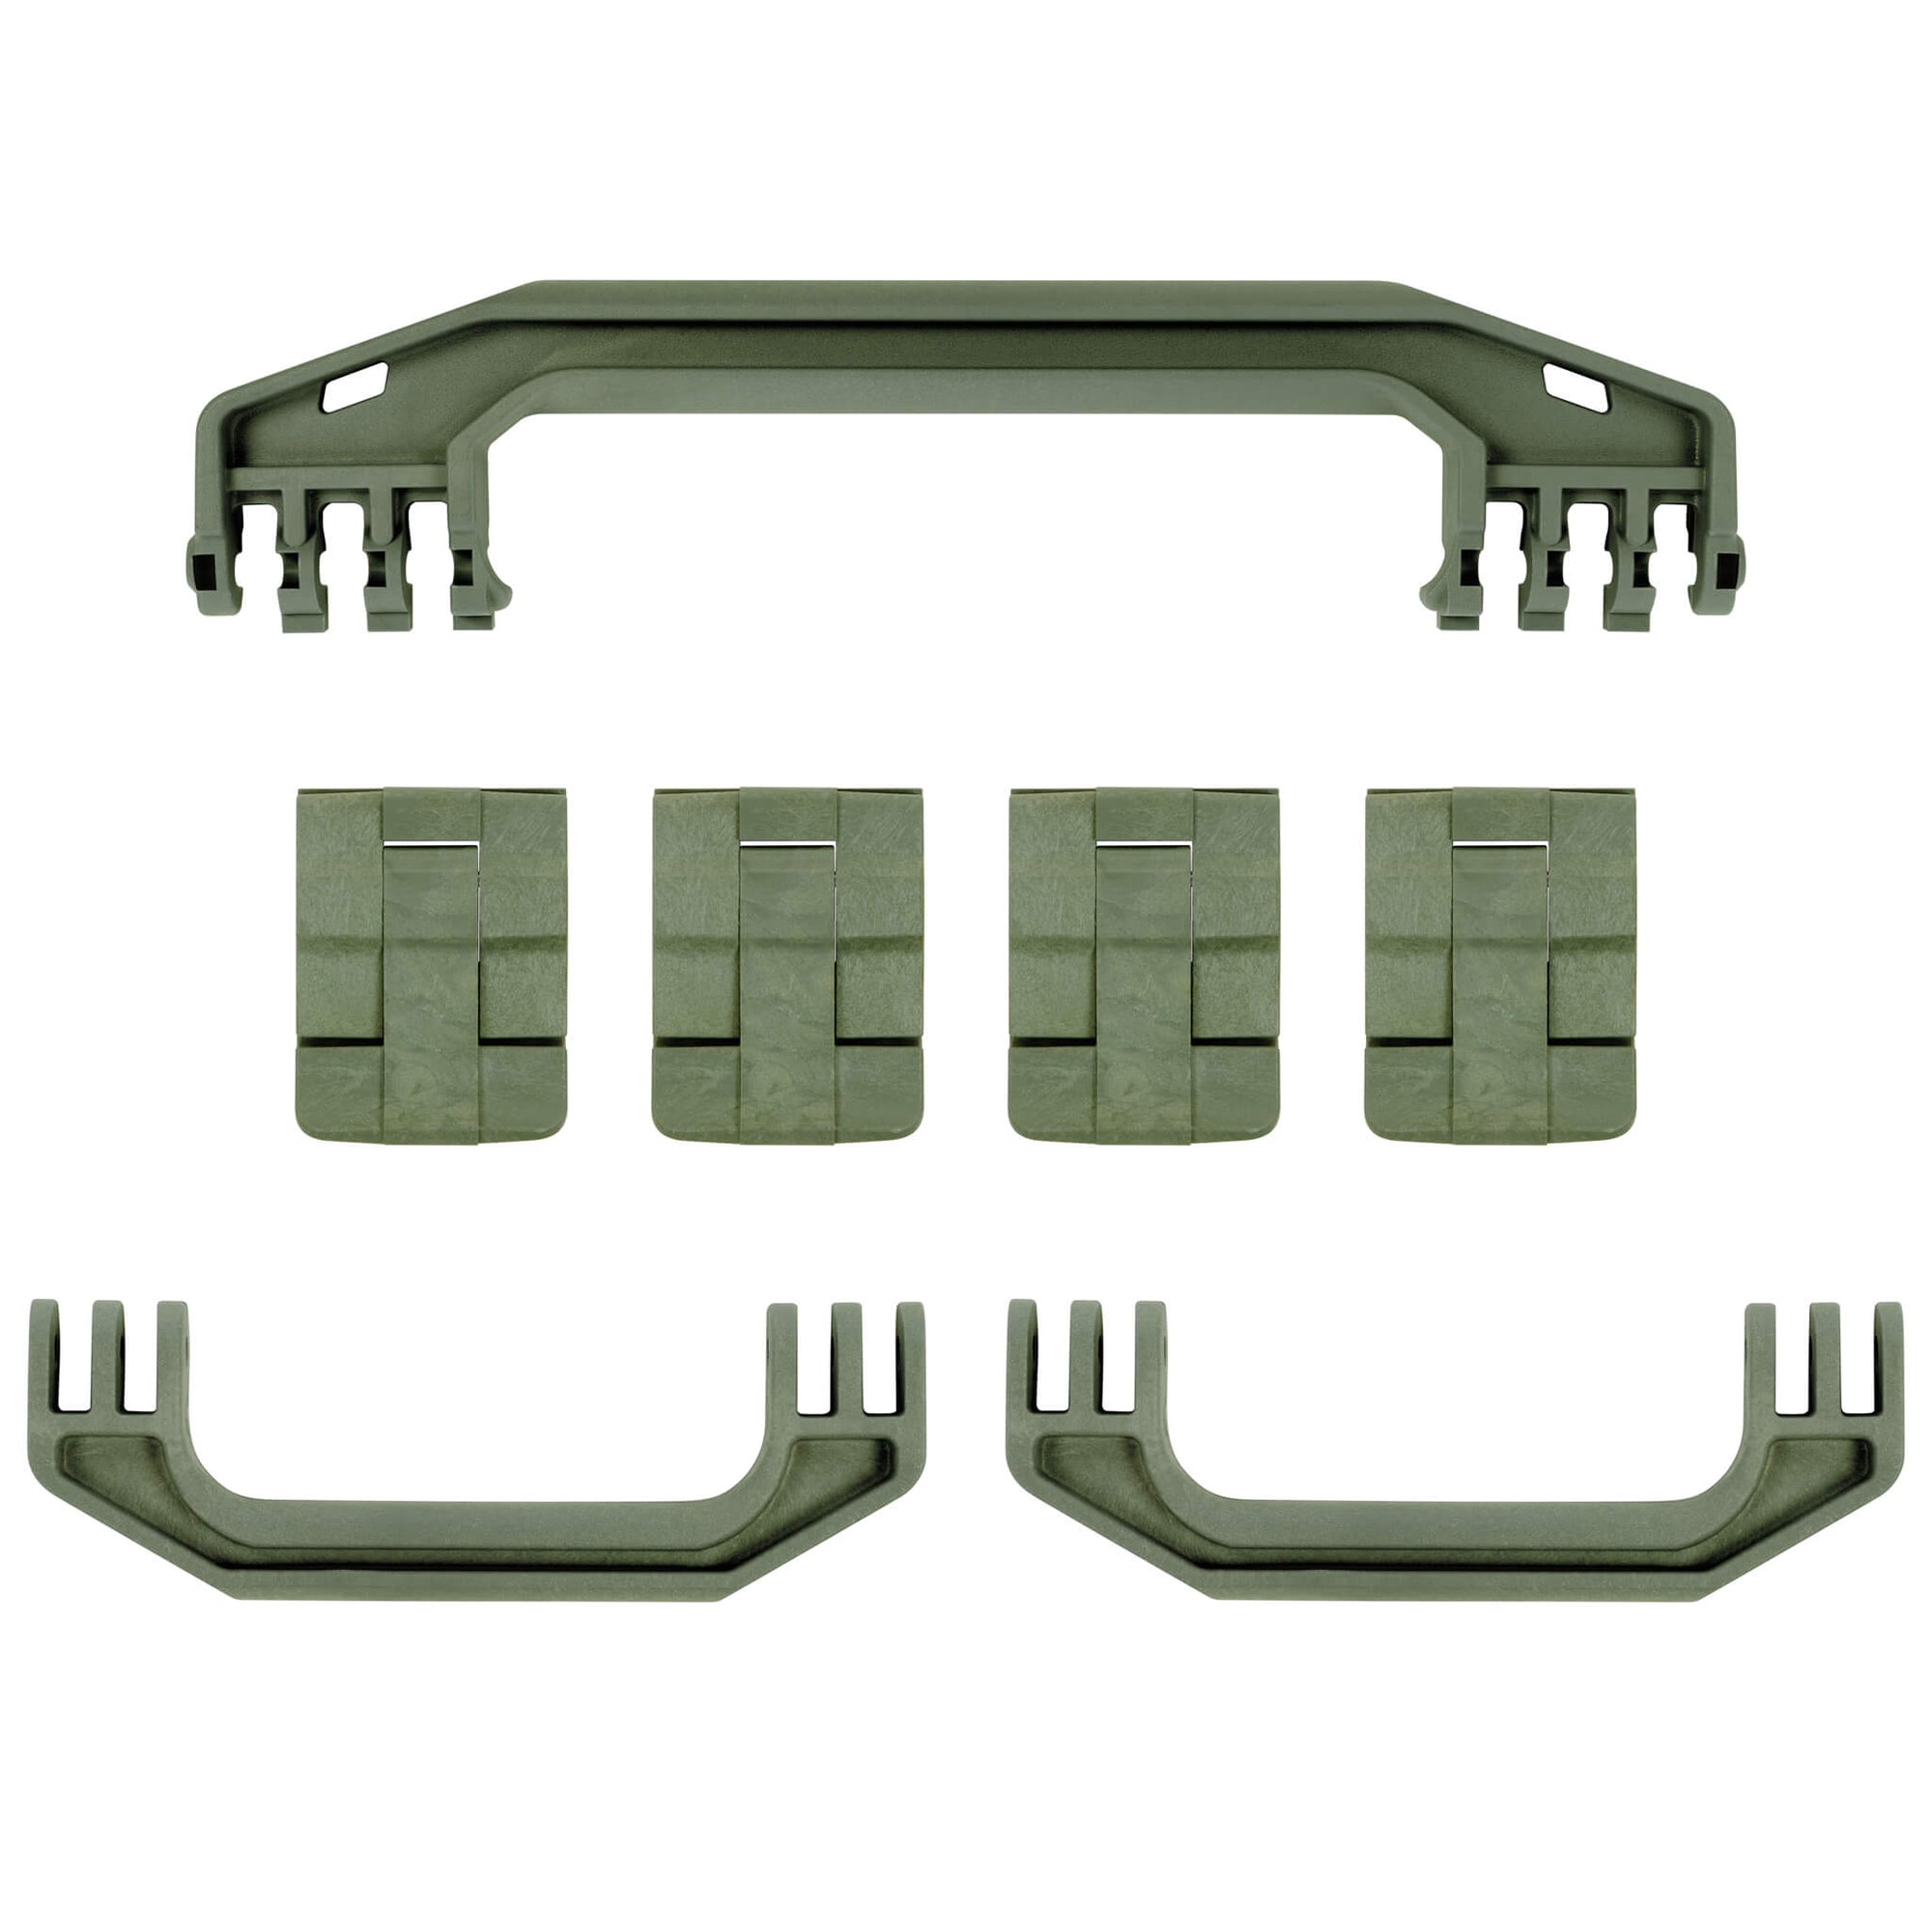 Pelican 1720 Gen1 Replacement Handles & Latches, OD Green (Set of 3 Handles, 4 Latches) ColorCase 